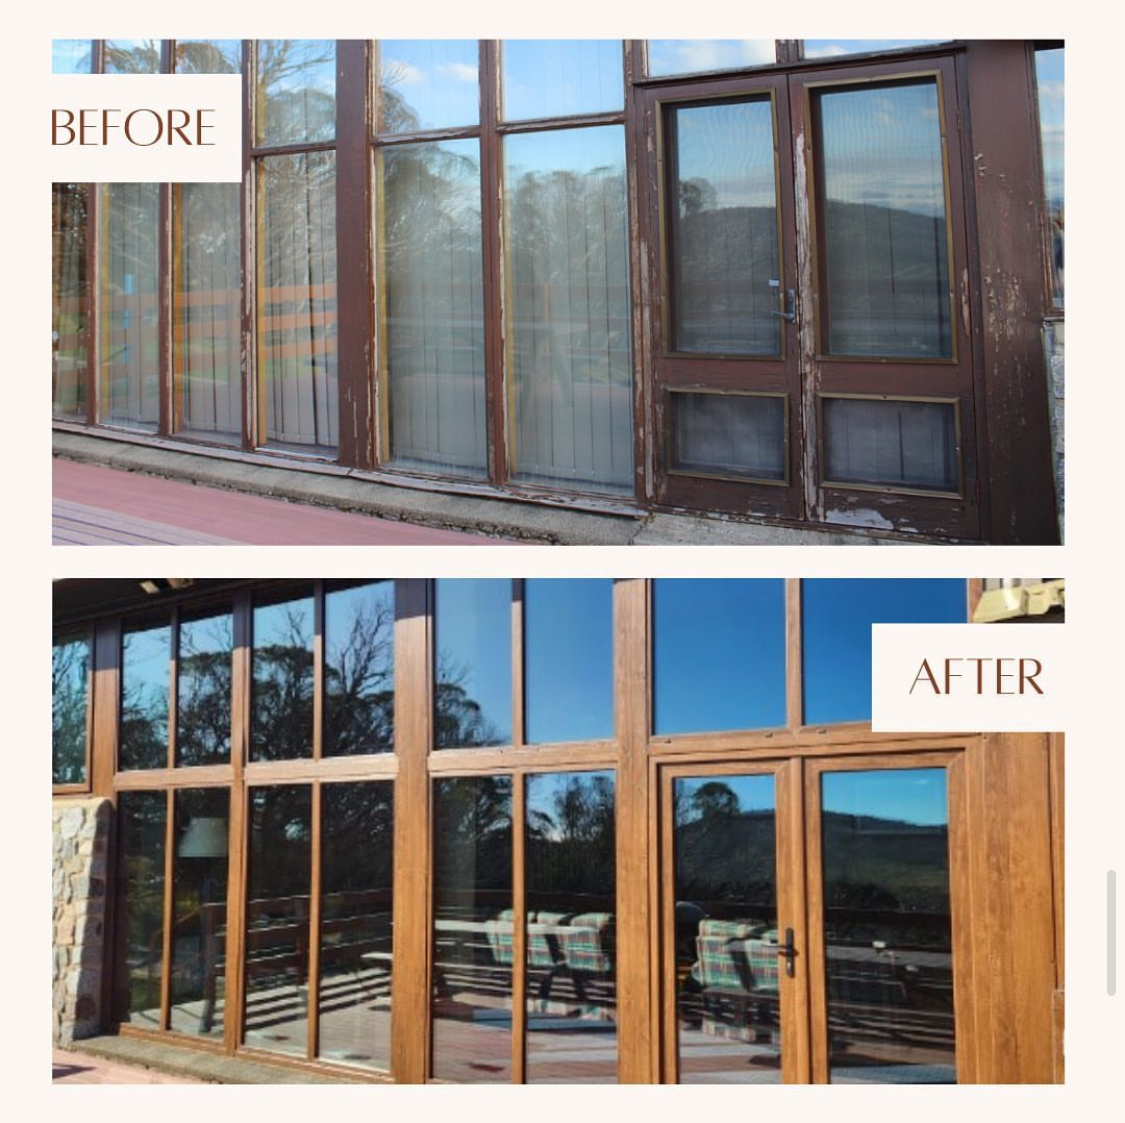 View Photo: Before and After at Valhalla Lodge